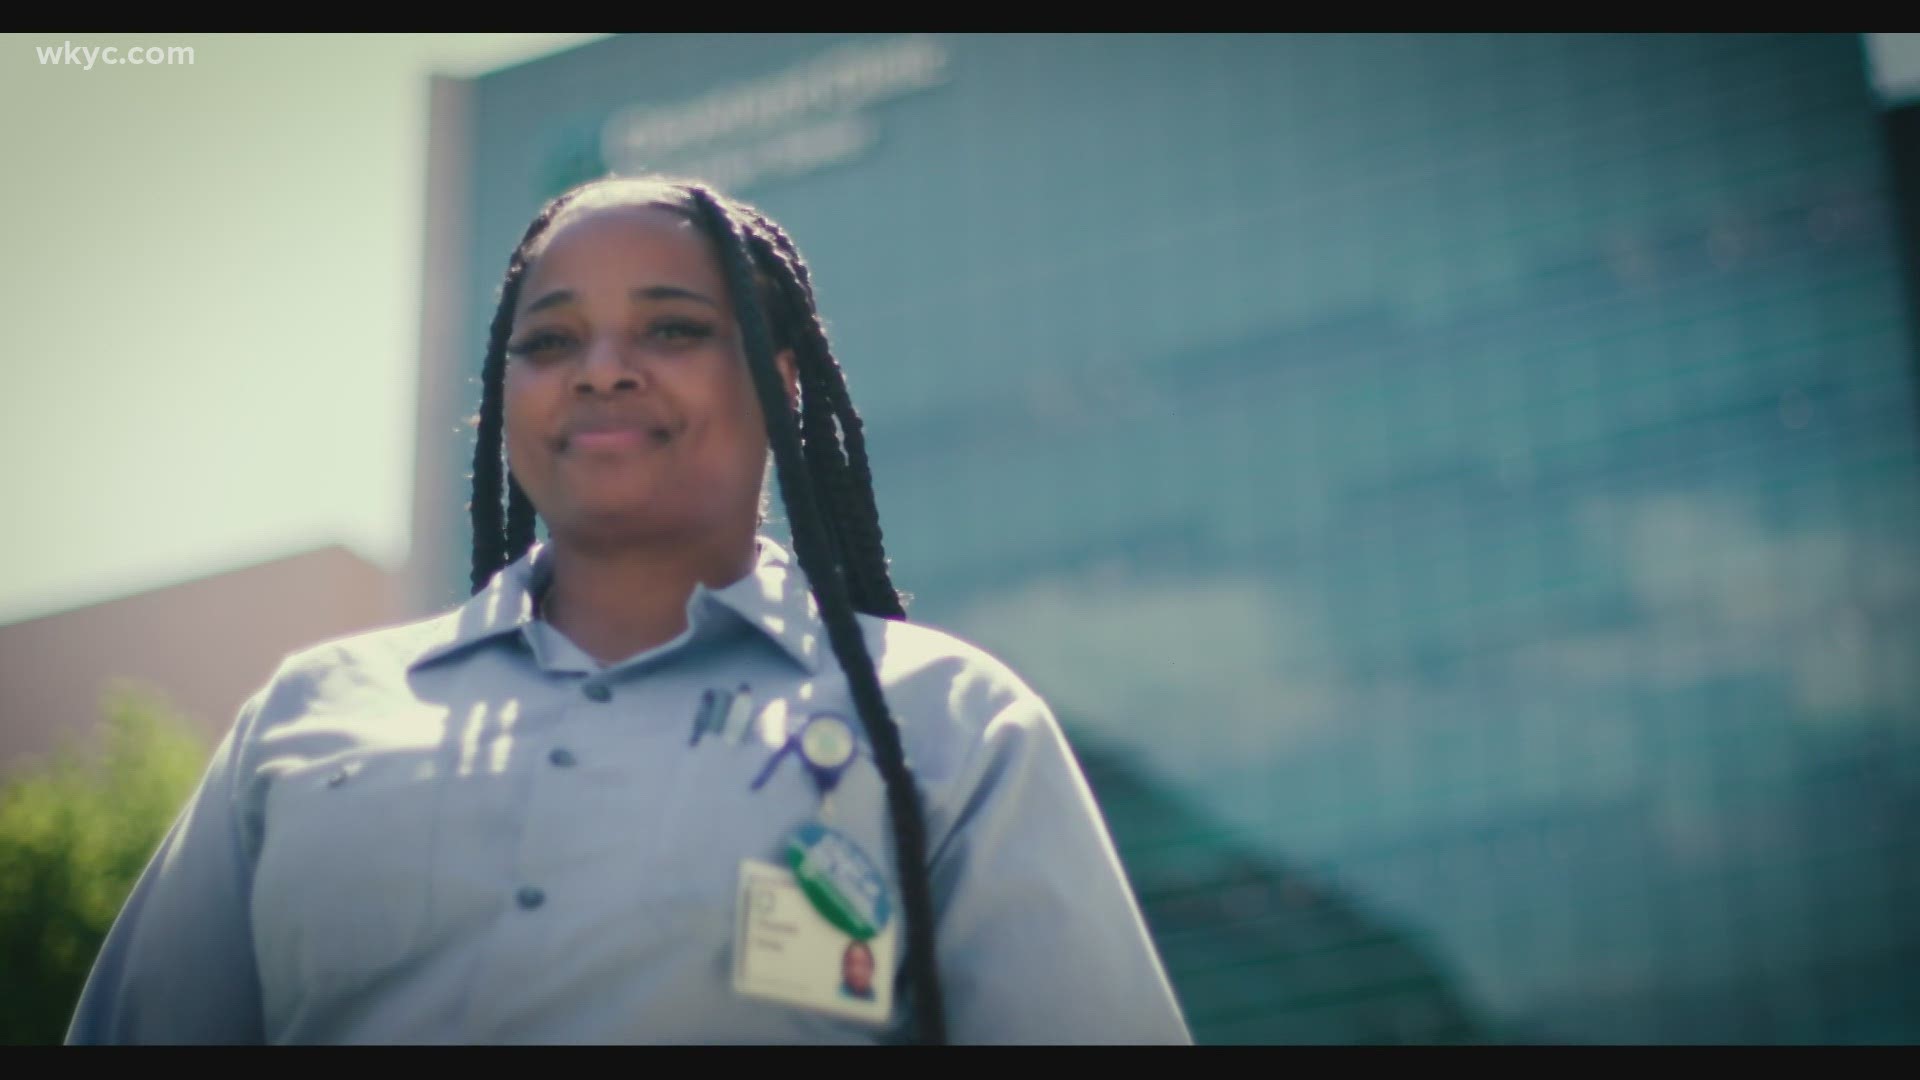 As an EVS worker at the Cleveland Clinic, Shantel Hicks not only cleans rooms; she truly cares for patients. Chris Webb has her story.